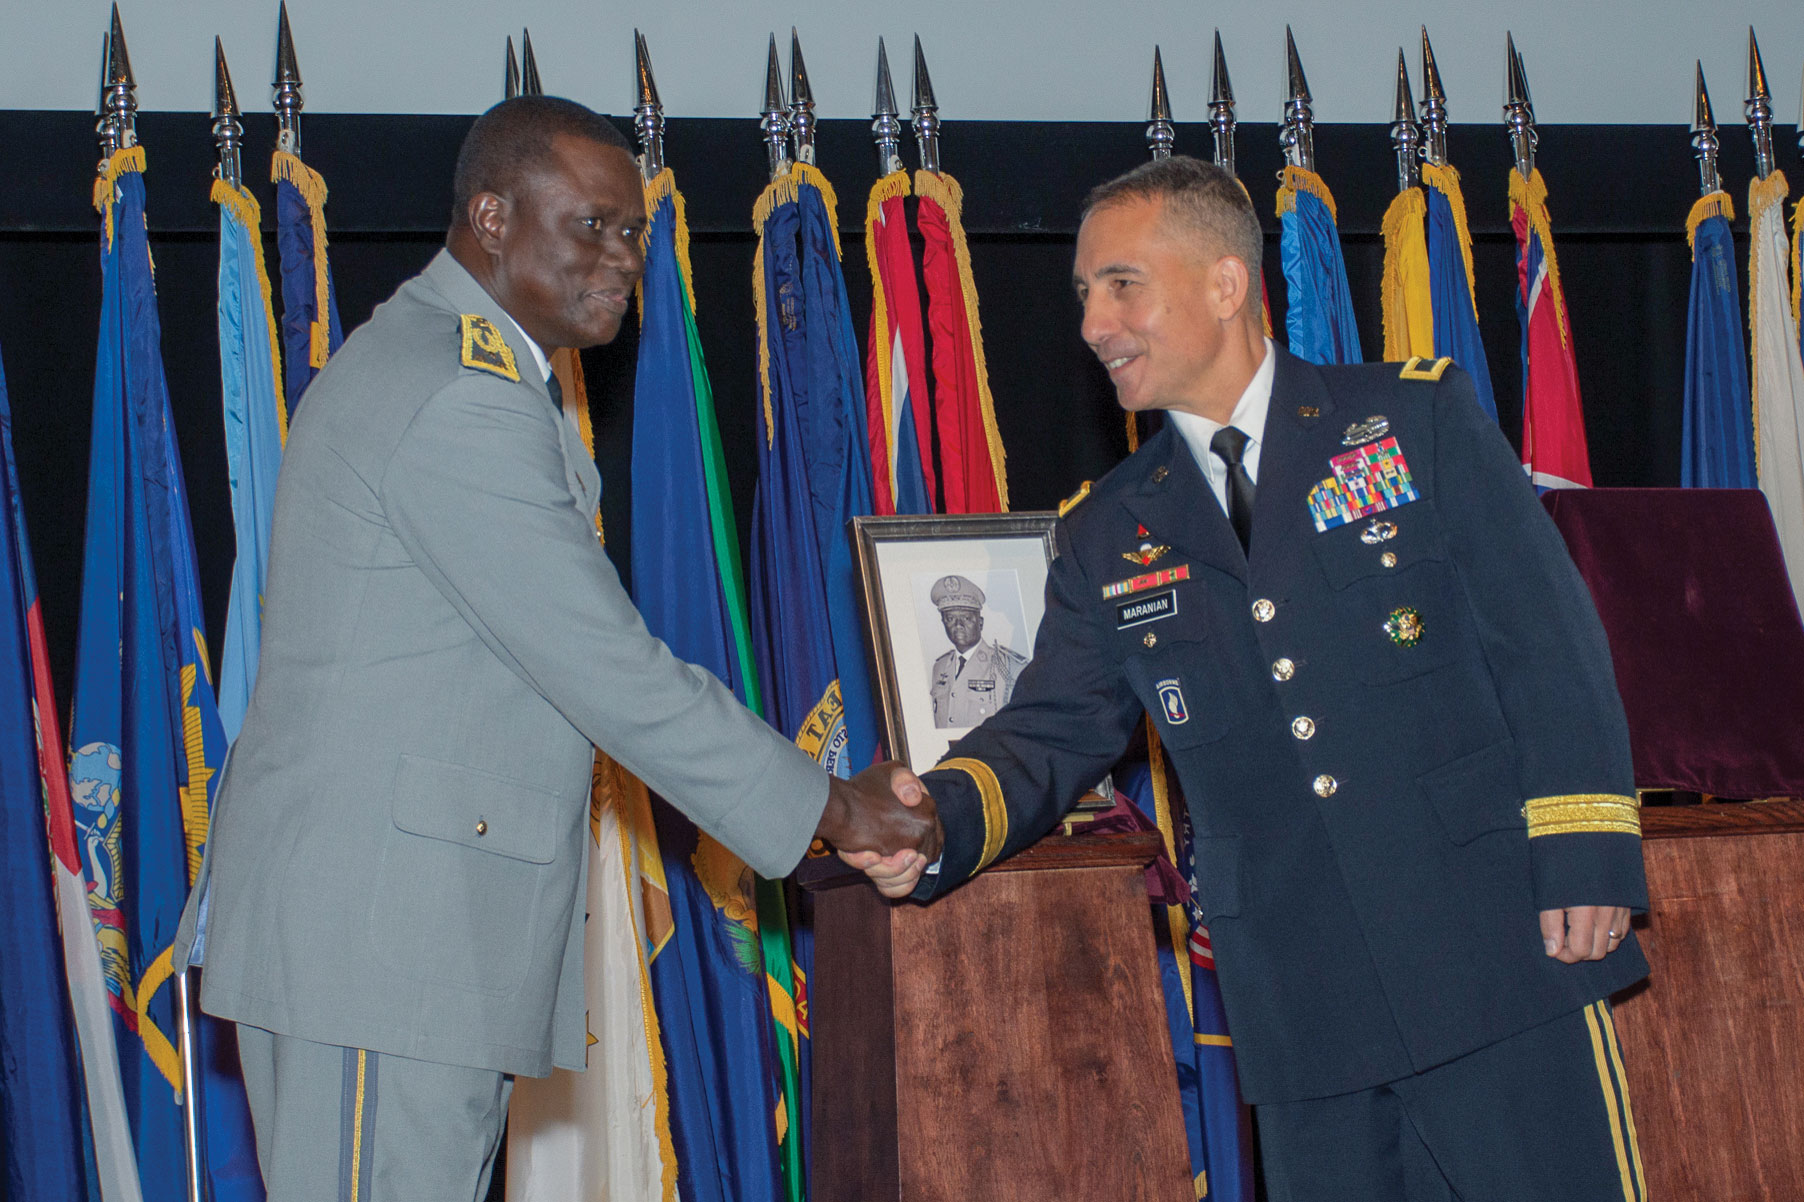 Brig. Gen. Stephen Maranian, CGSC deputy commandant and Army University provost, congratulates Maj. Gen. Francois Ndiaye, chief of staff of the Senegalese Army, after unveiling his IHOF portrait during the induction ceremony Oct. 3, 2019, at the Lewis and Clark Center.